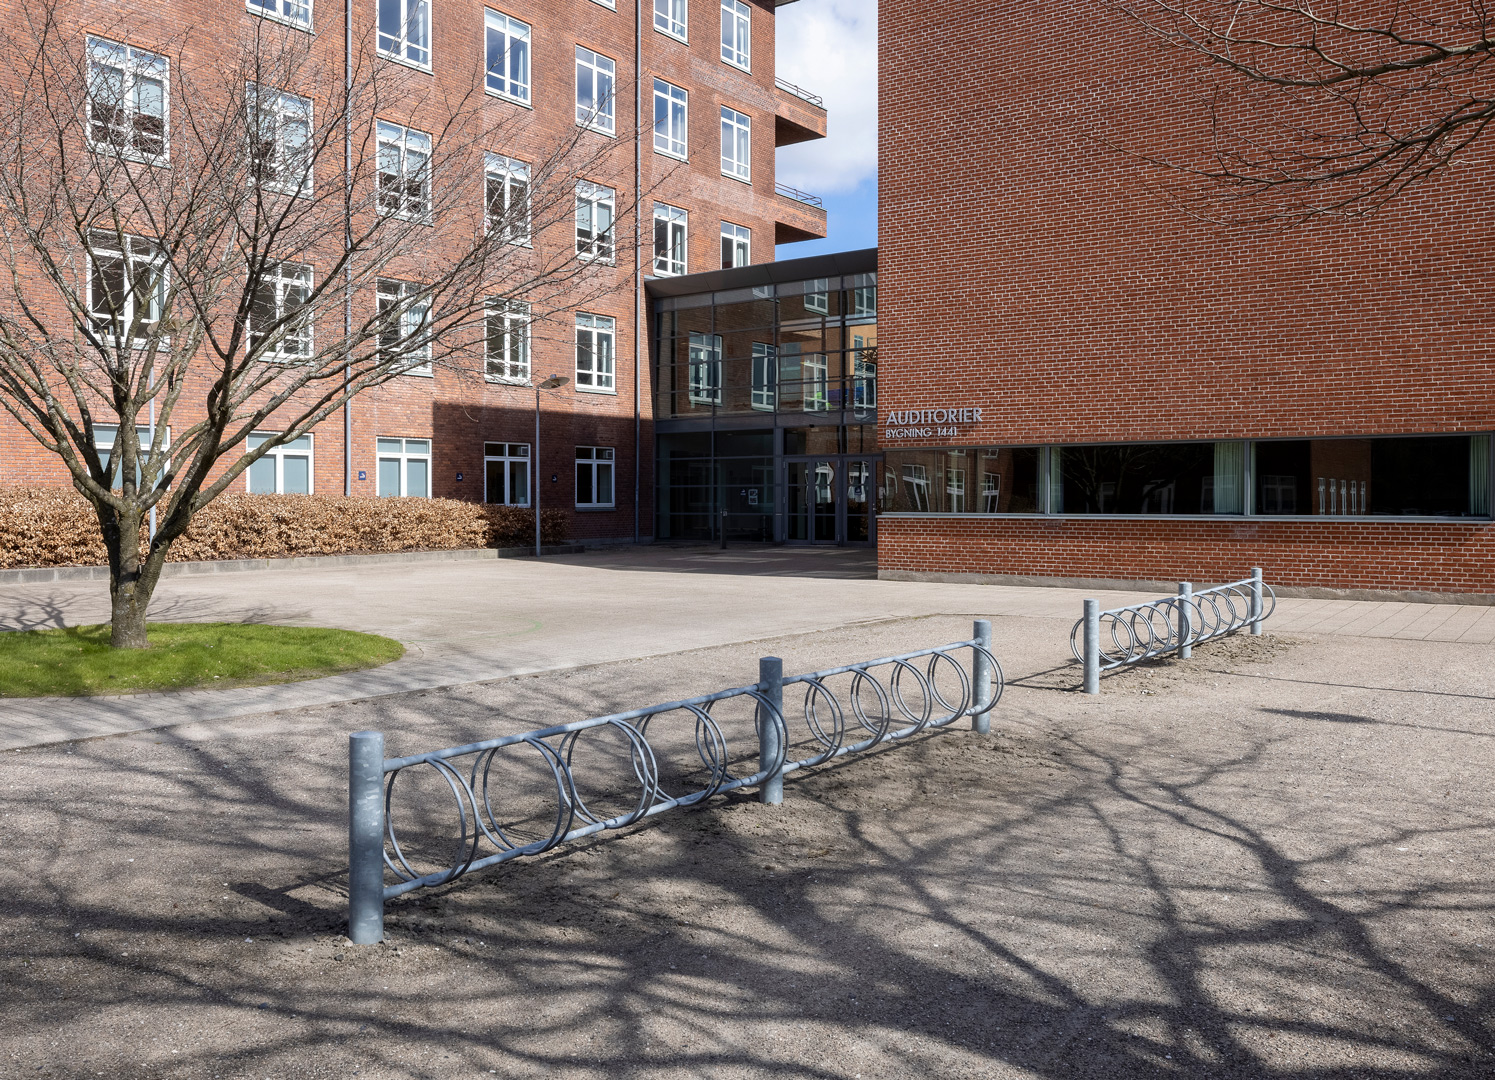 Modular bicycle rack stands in front of educational institution